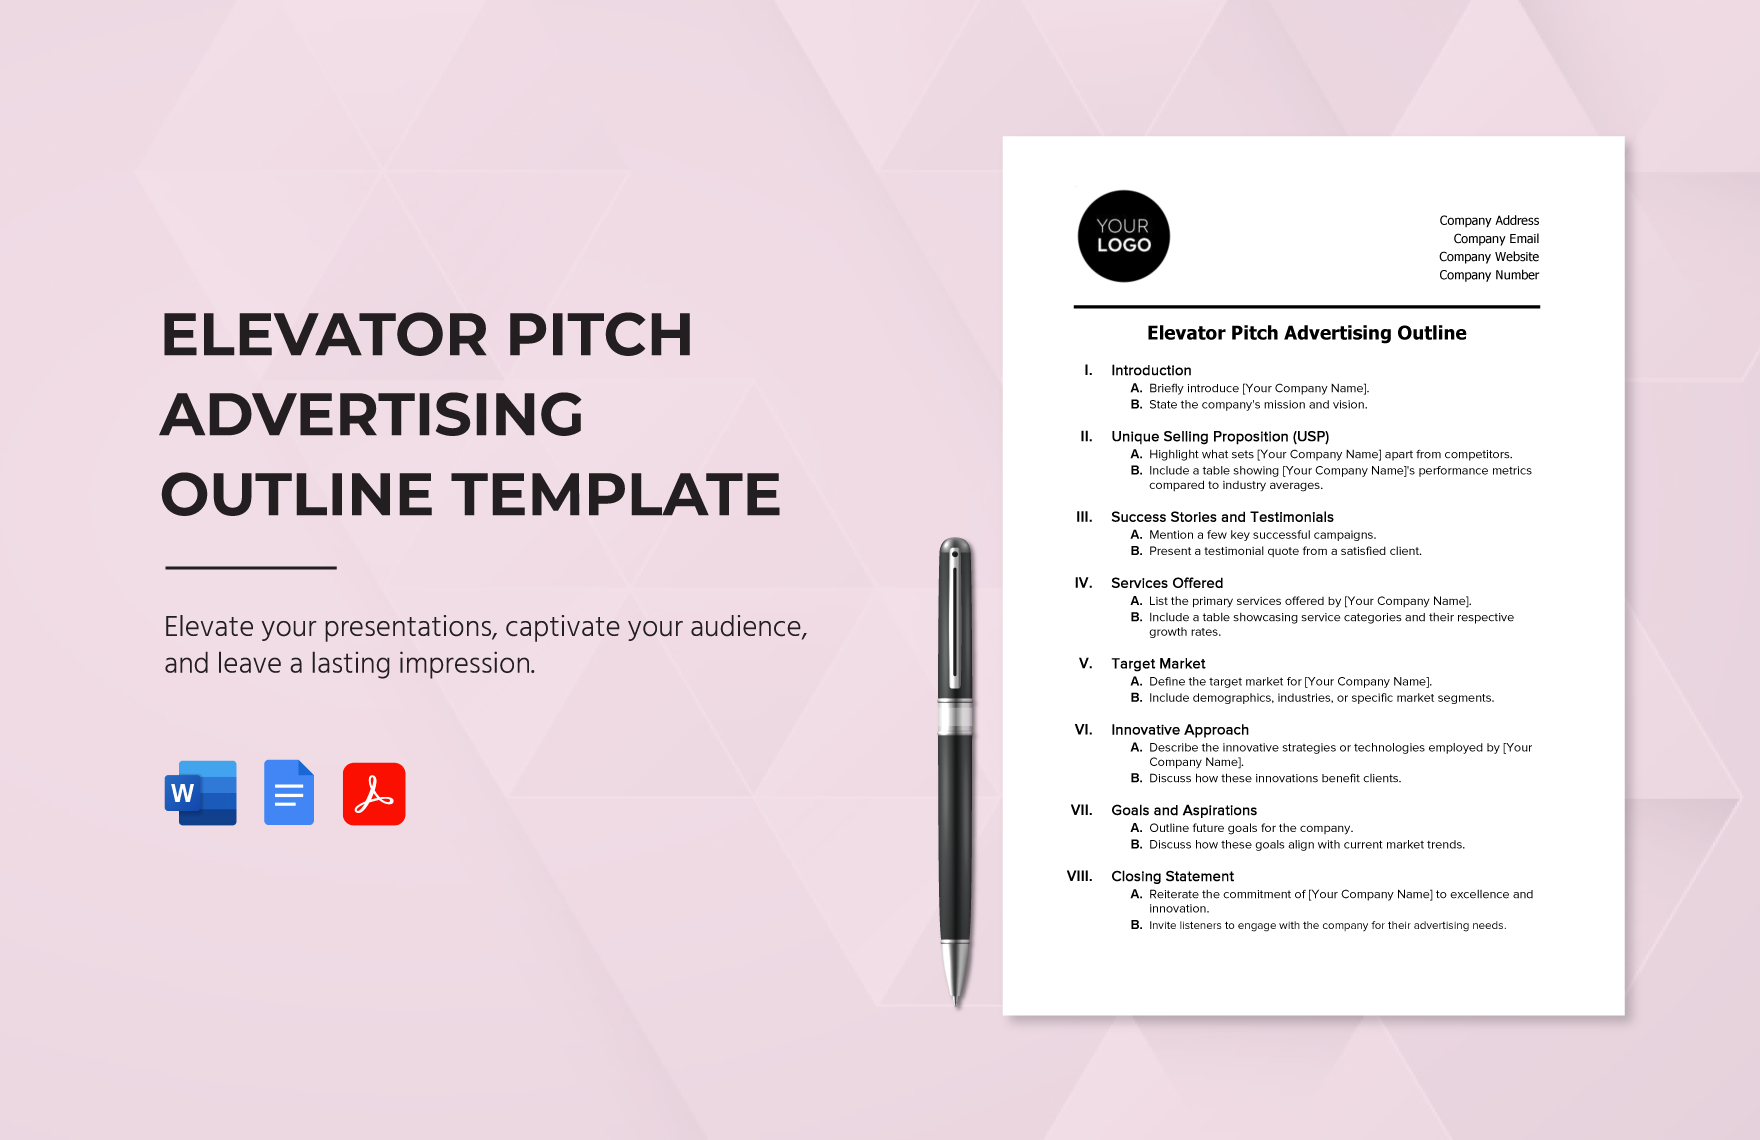 Elevator Pitch Advertising Outline Template